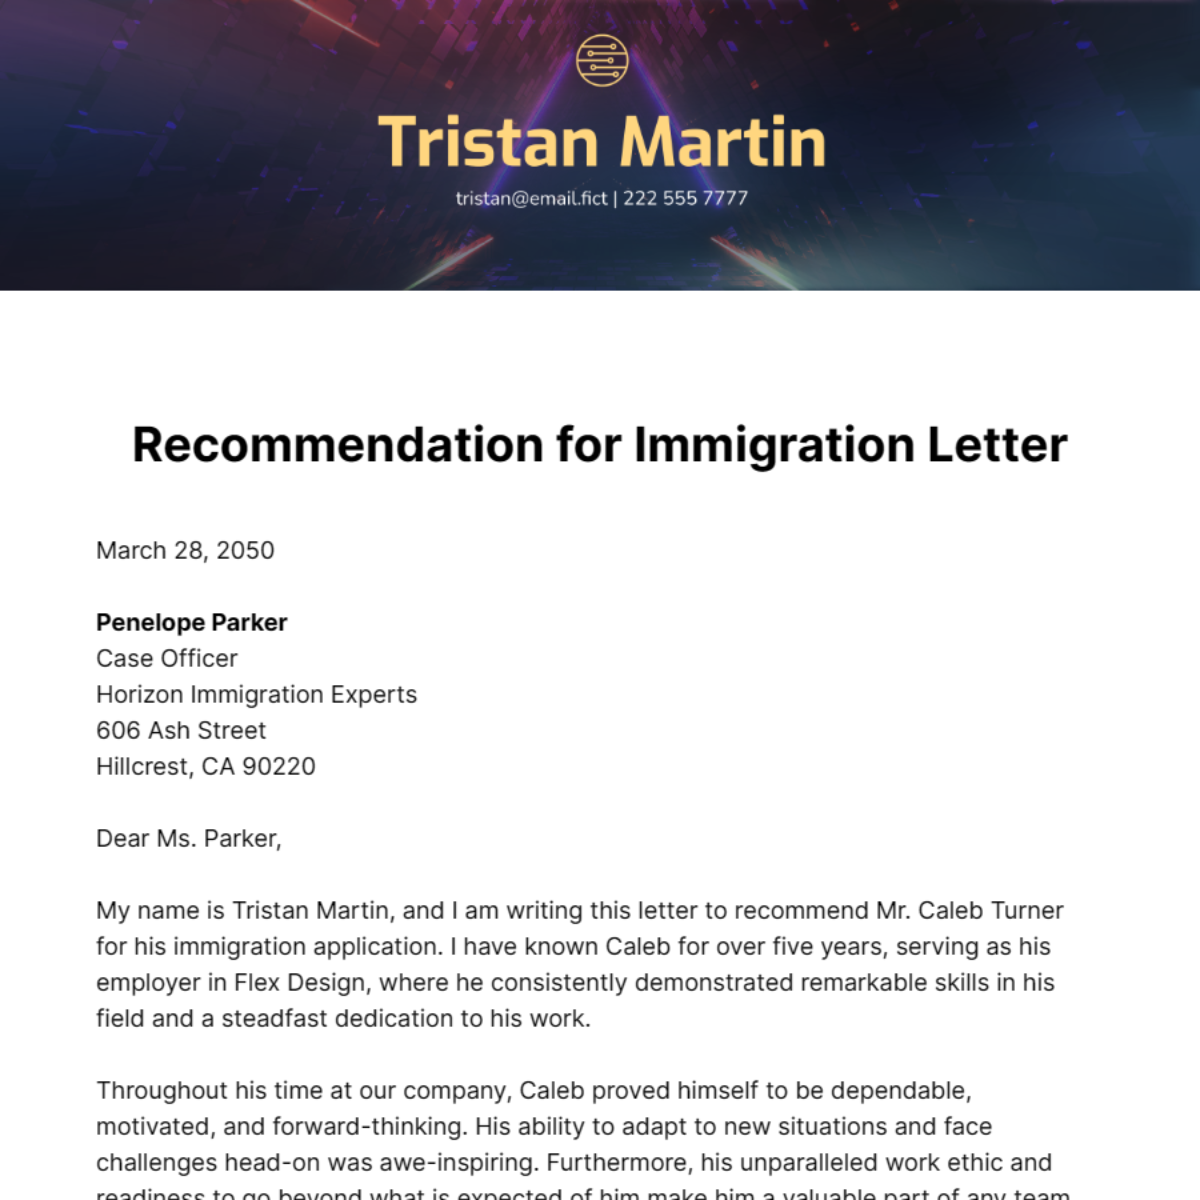 Recommendation for Immigration Letter Template